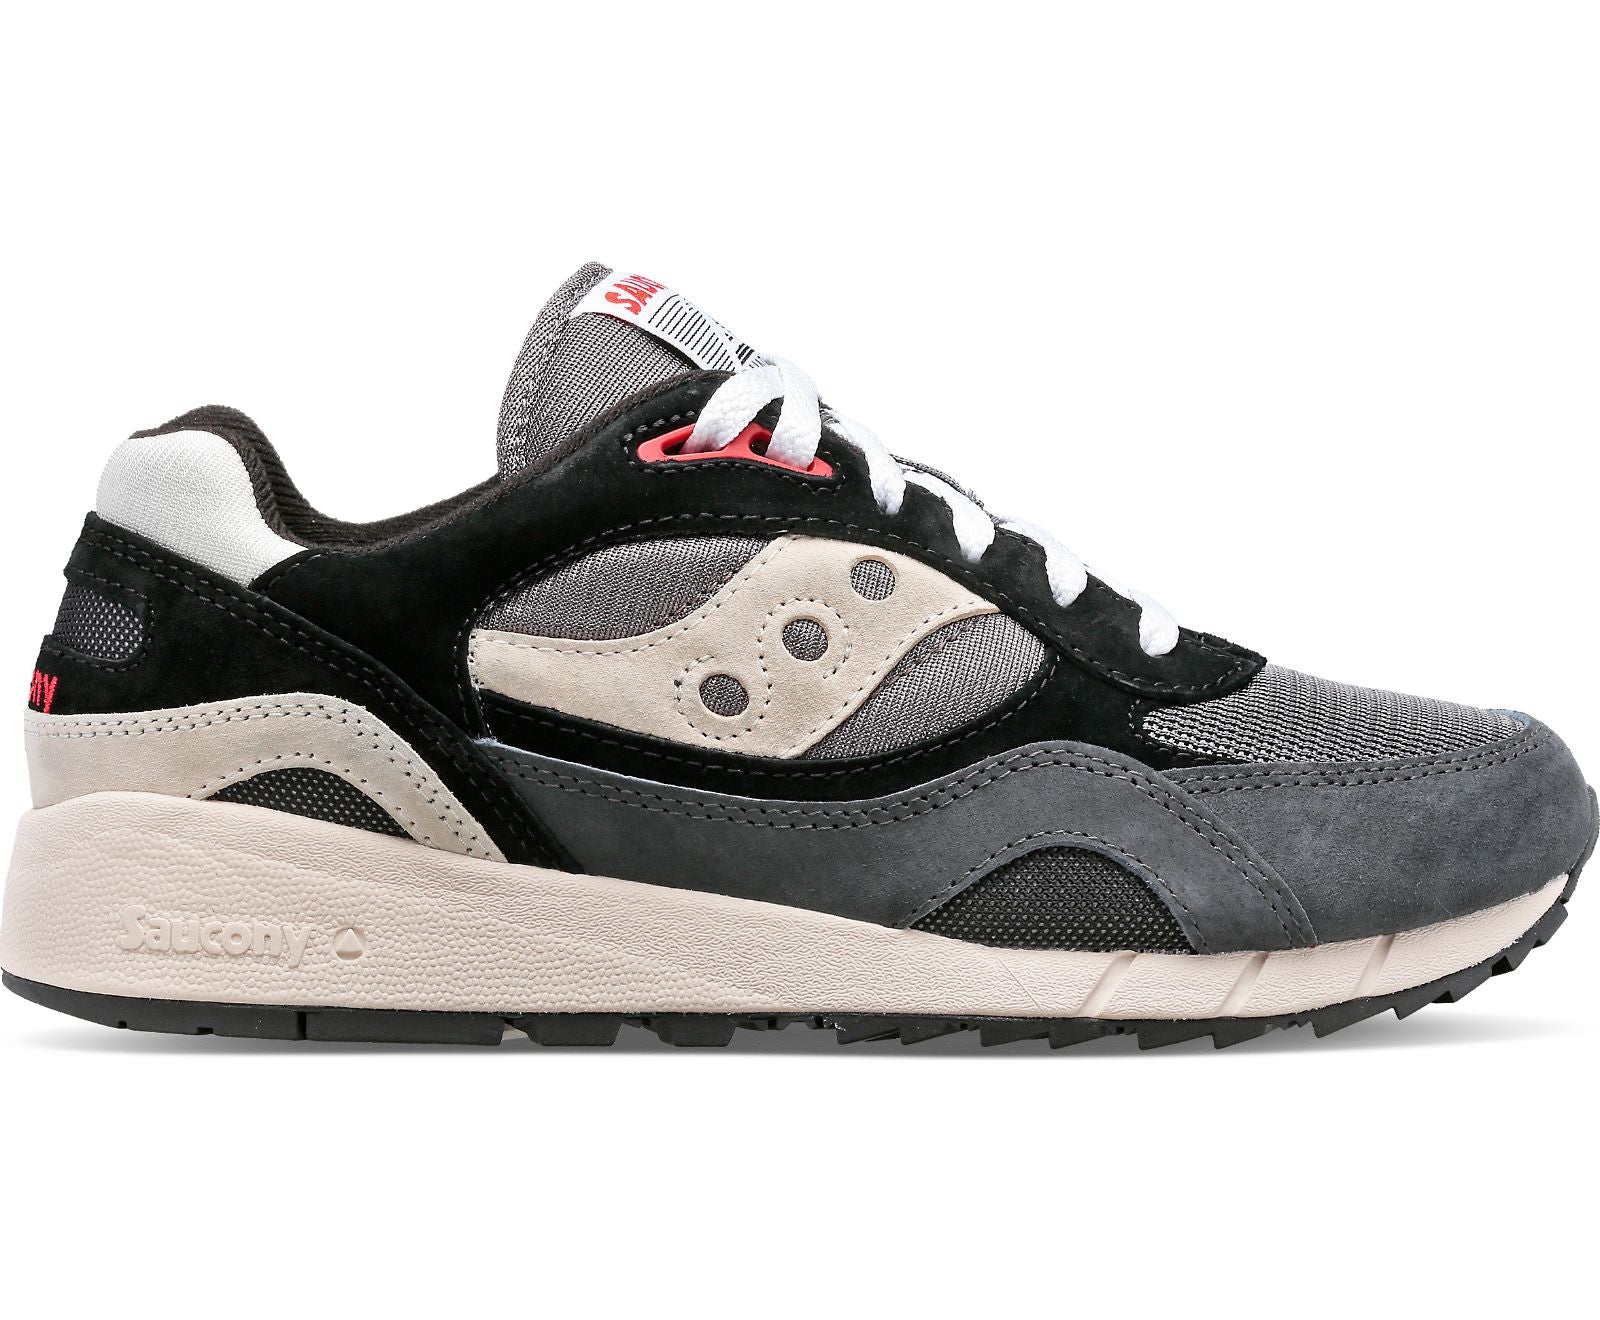 Lateral view of the Men's Saucony Shadow 5000 lifestyle shoe in Grey/Black